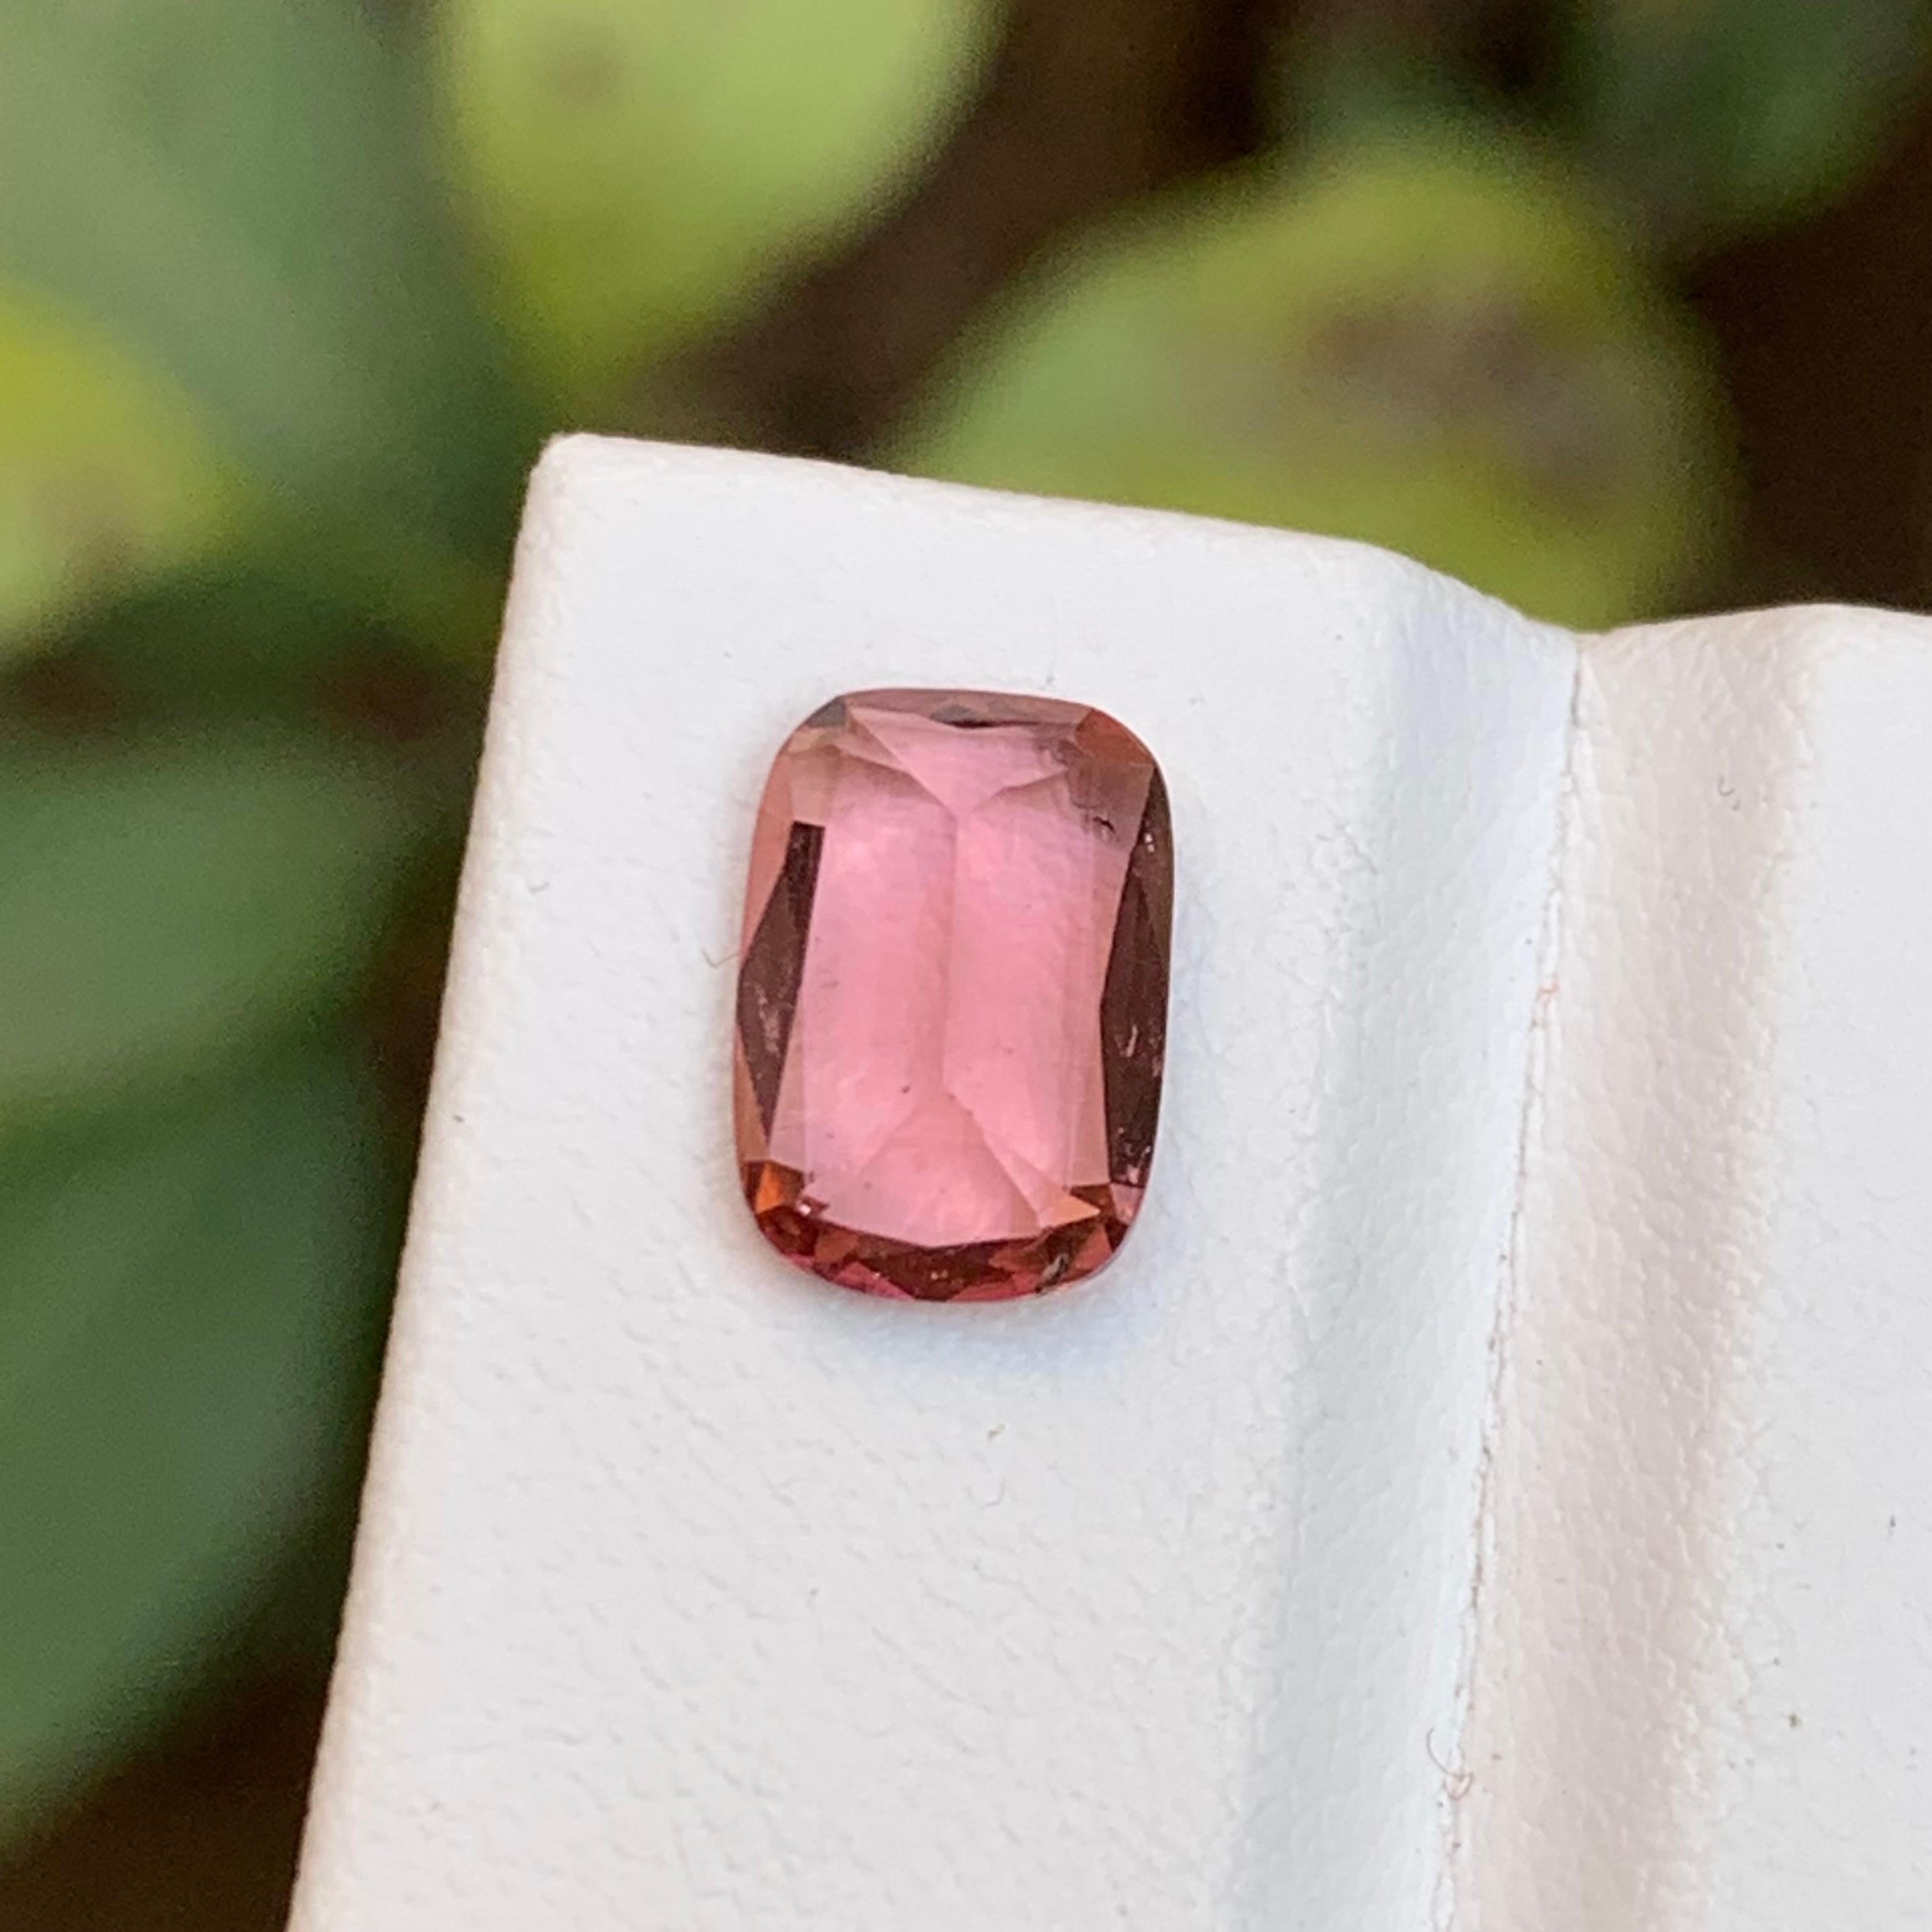 Rare Pink Natural Tourmaline Loose Gemstone, 2.30 Ct Cushion Cut Ideal for Ring For Sale 1